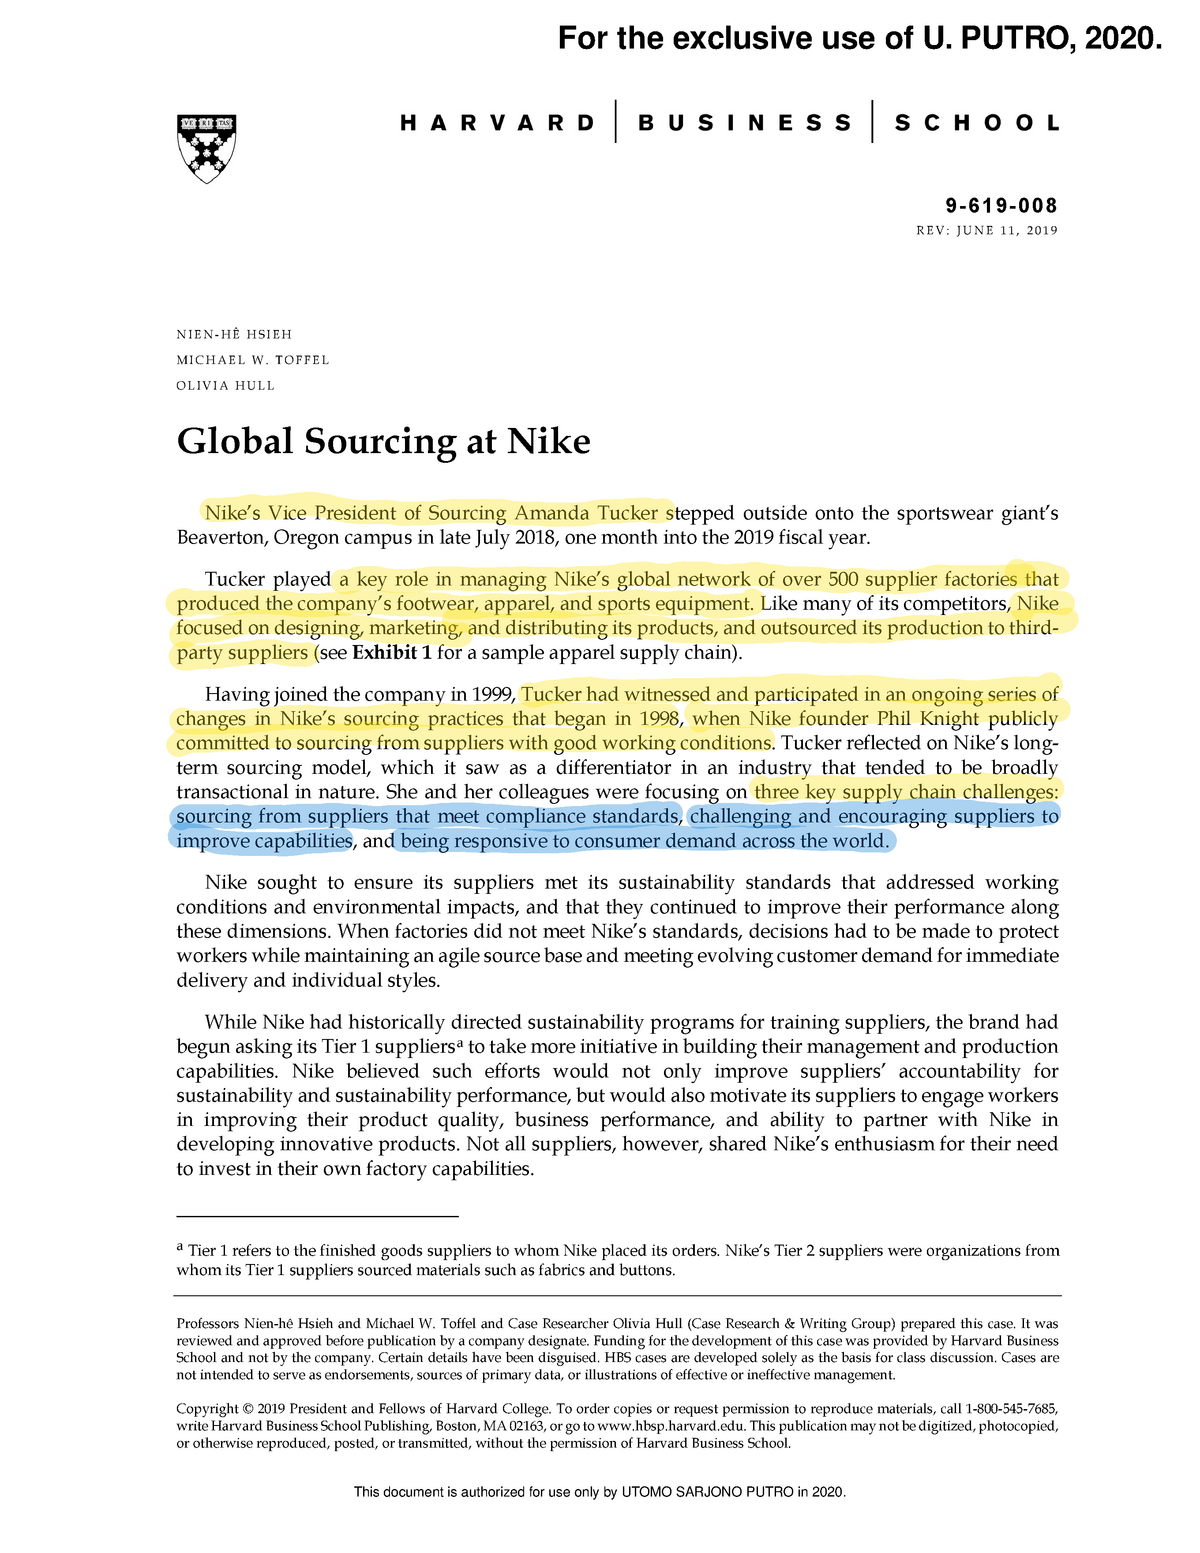 global sourcing at nike case study solution